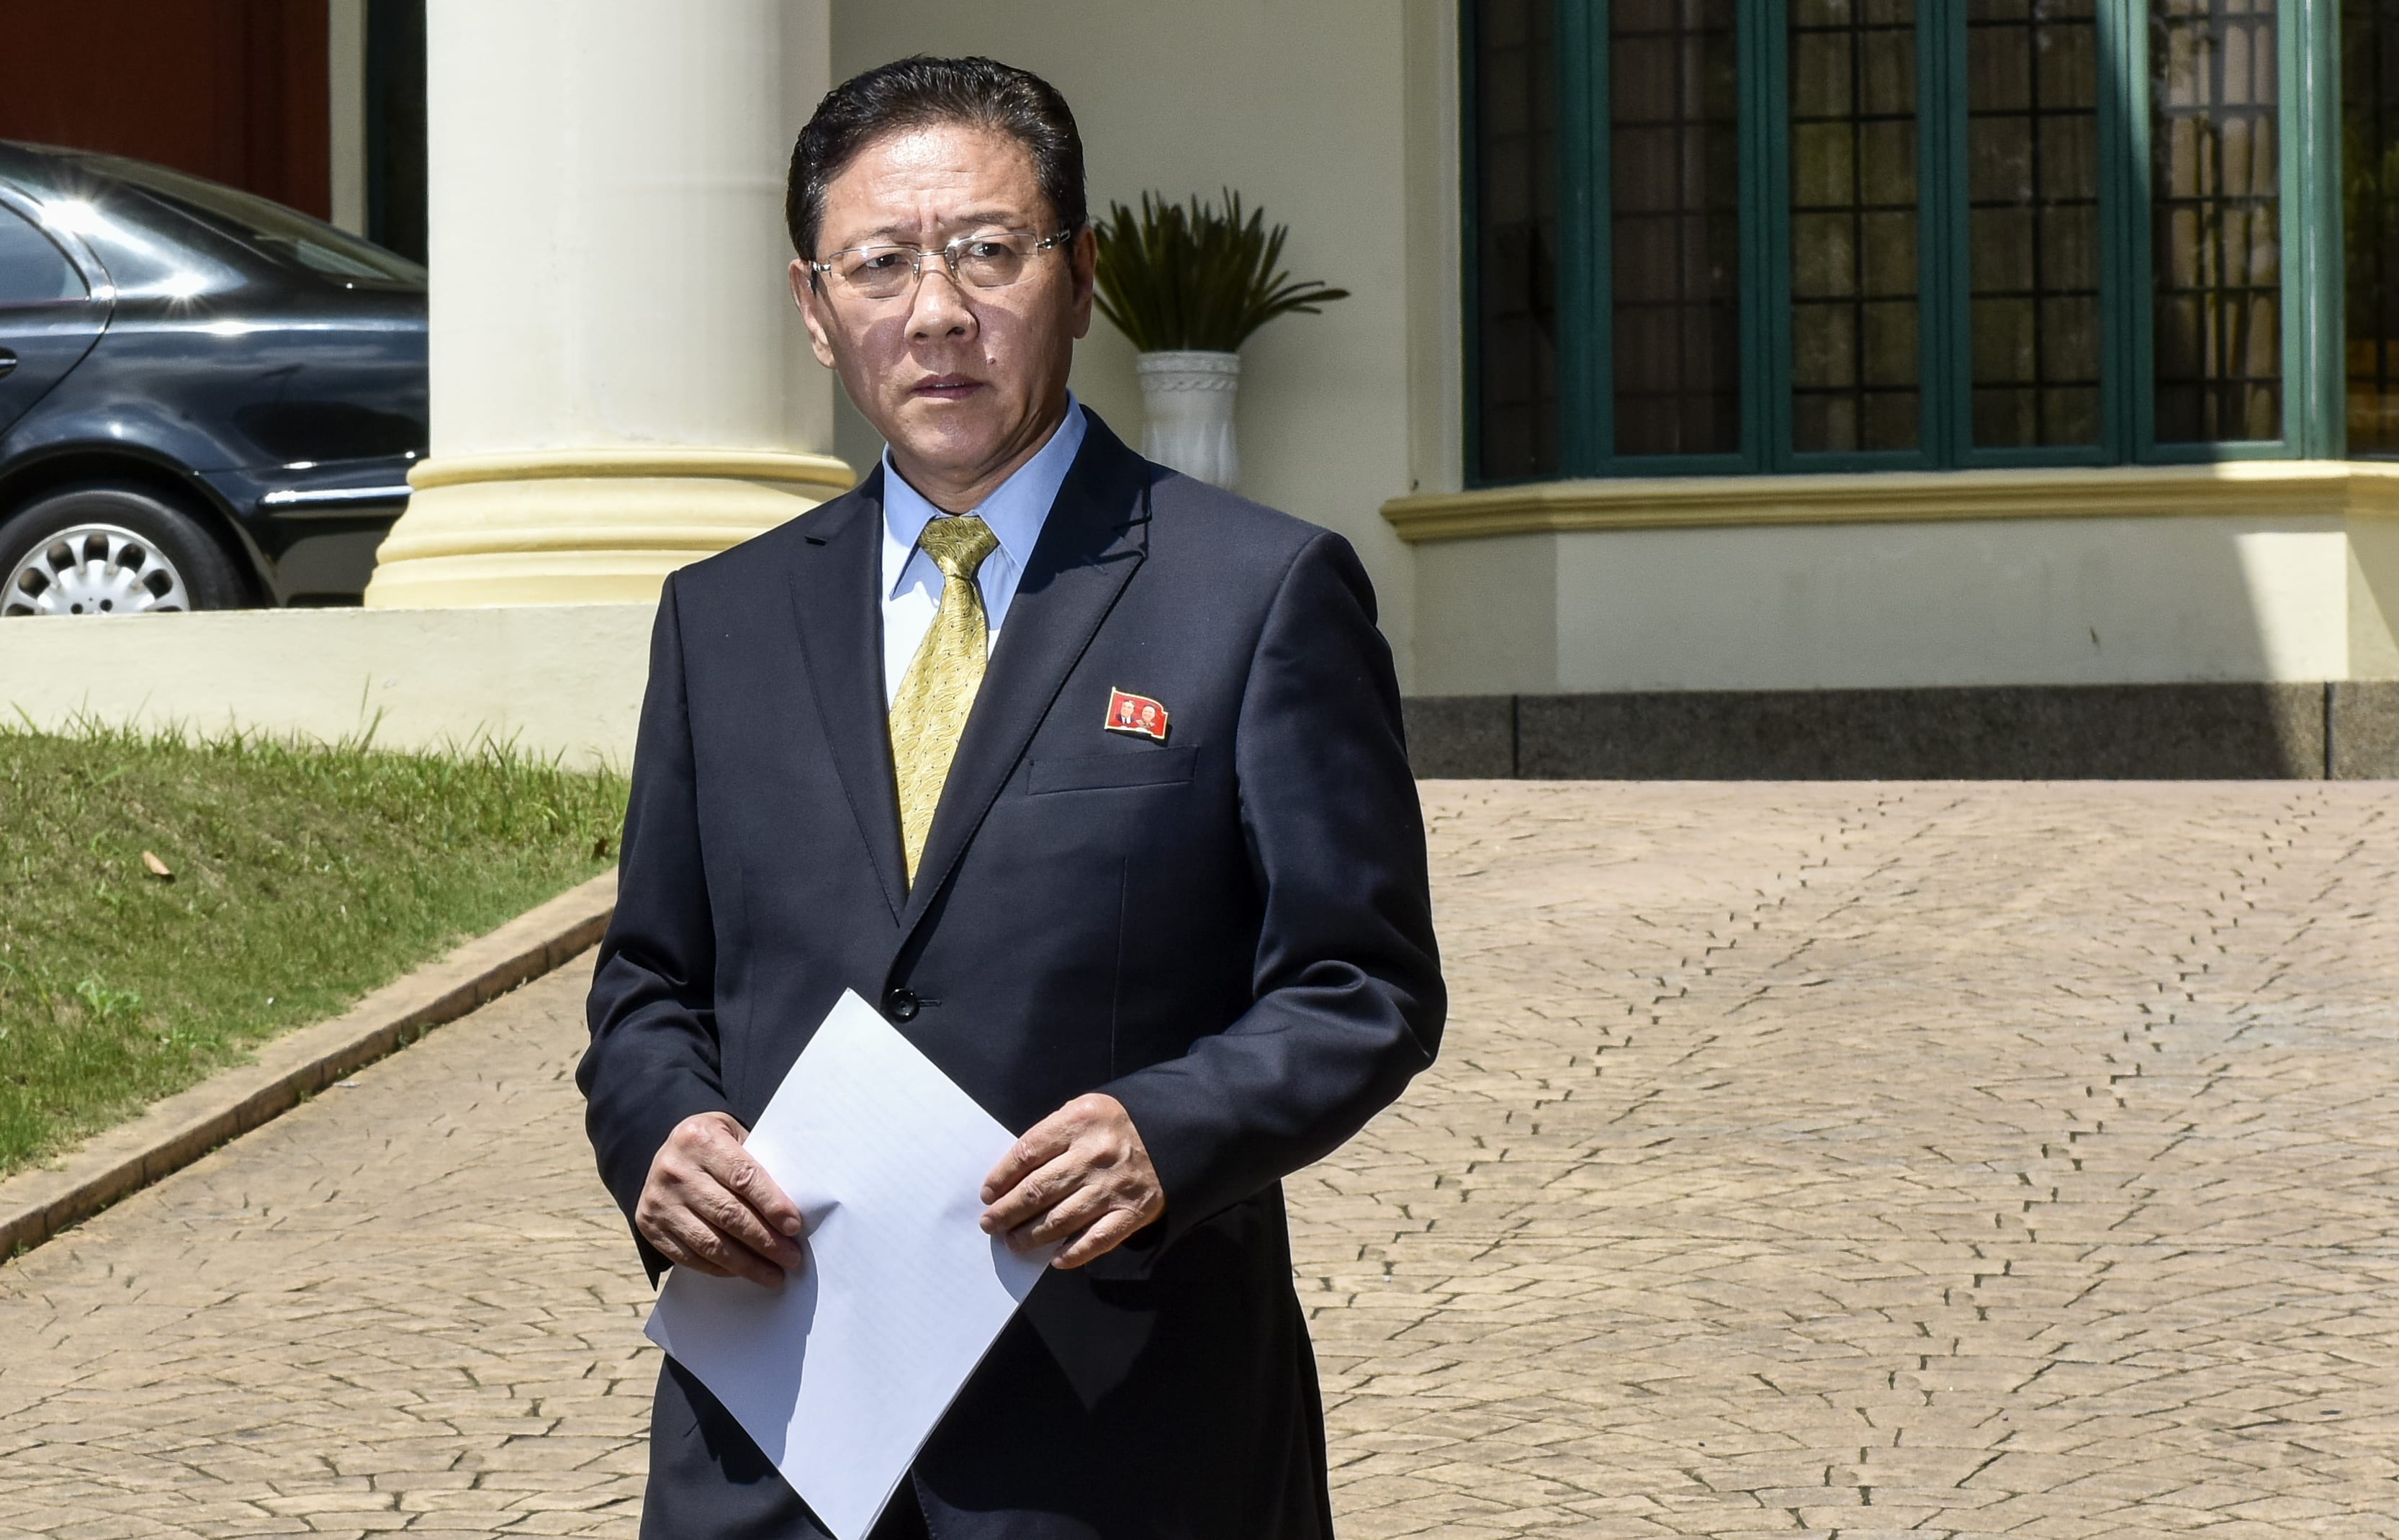 North Korea's ambassador to Malaysia Kang Chol has been ordered to leave the country after he said Malaysia's handling of an investigation into Kim Jong-nam's death could not be trusted.